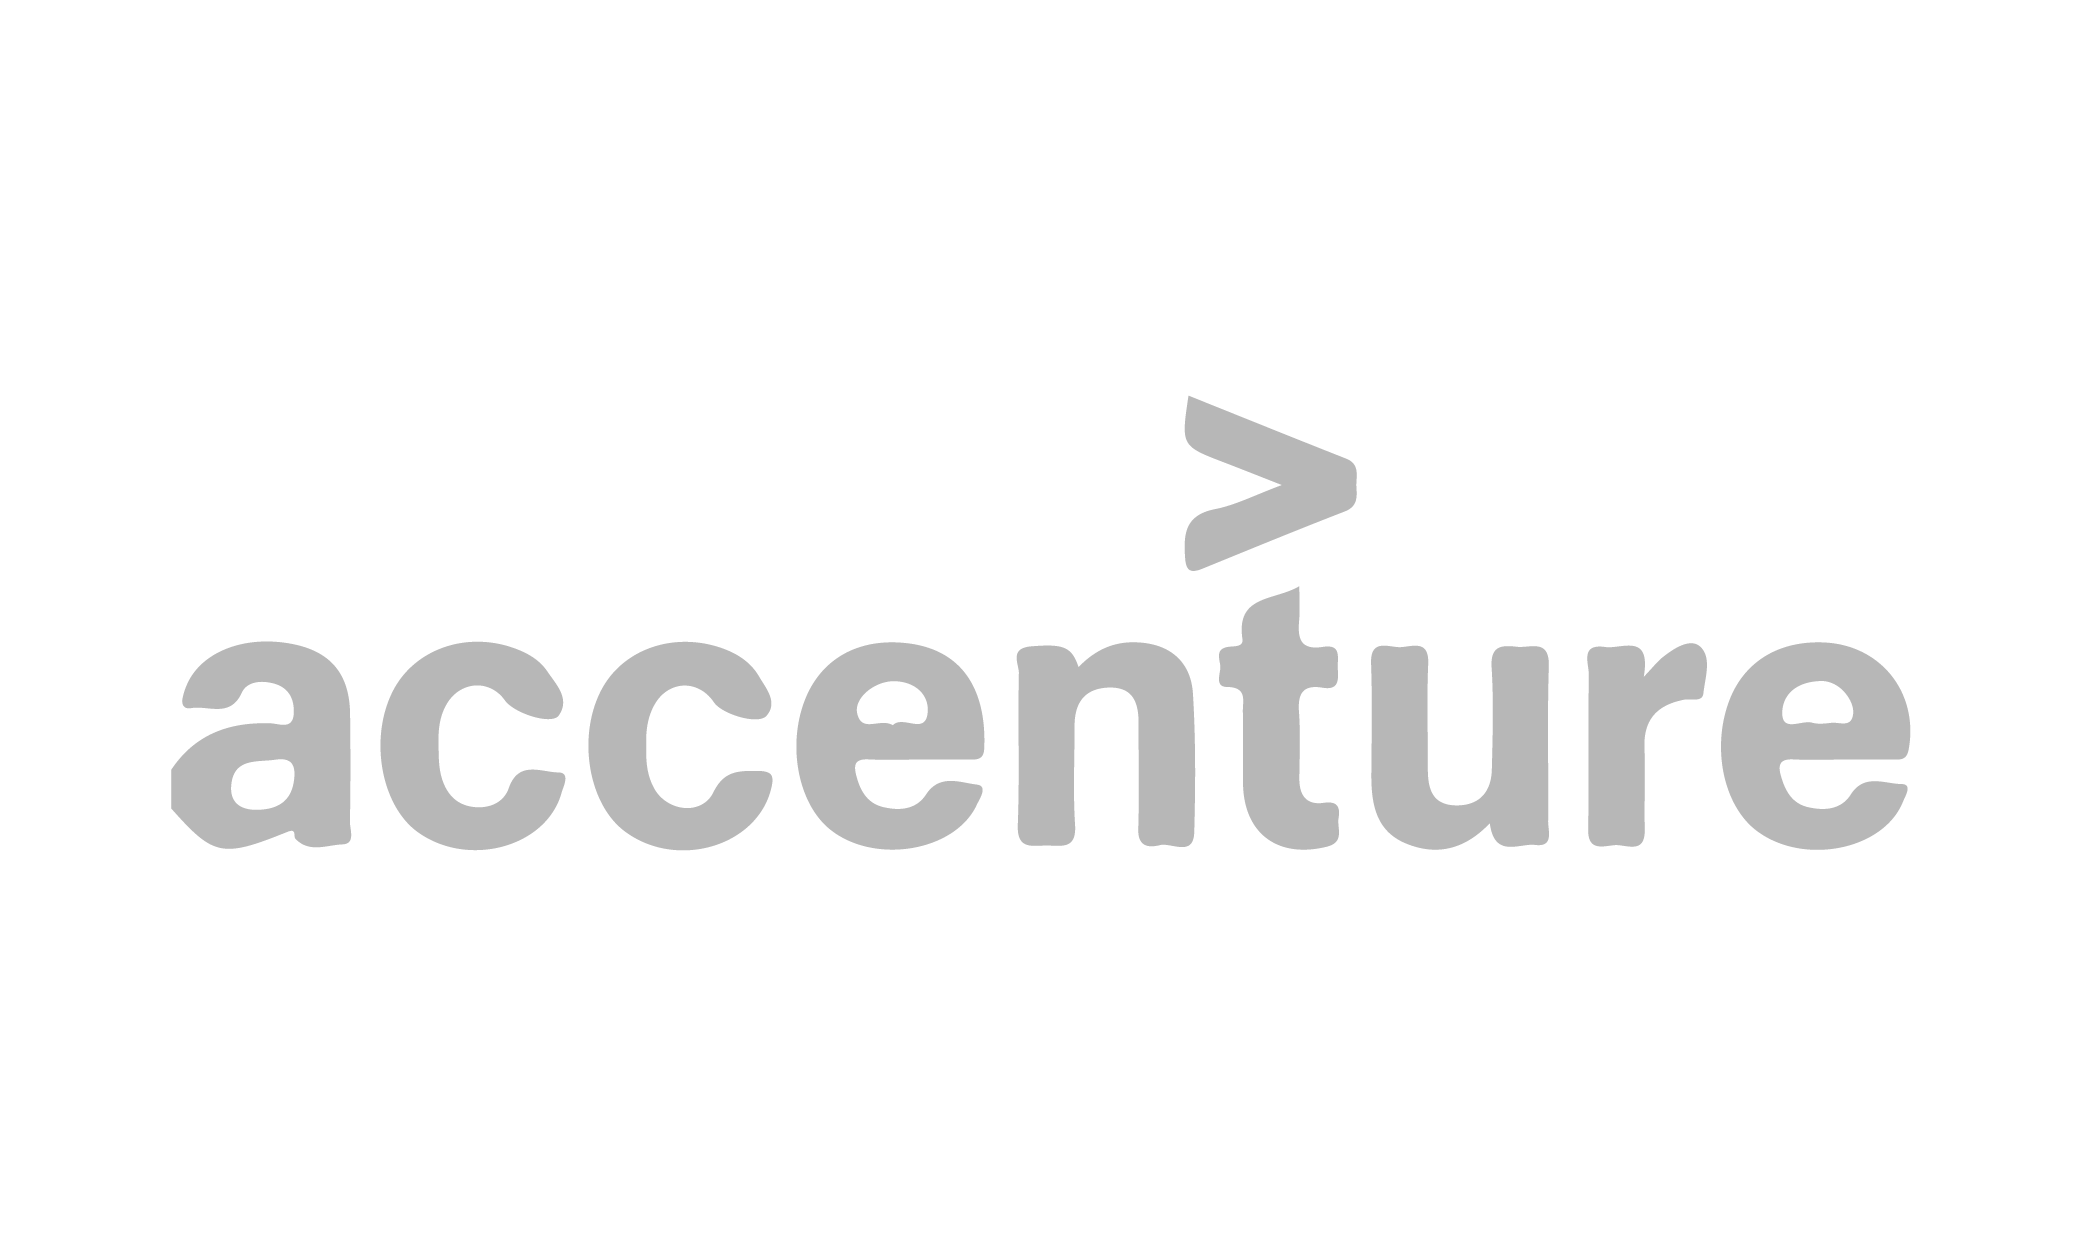 Accenture_Gray-01.png